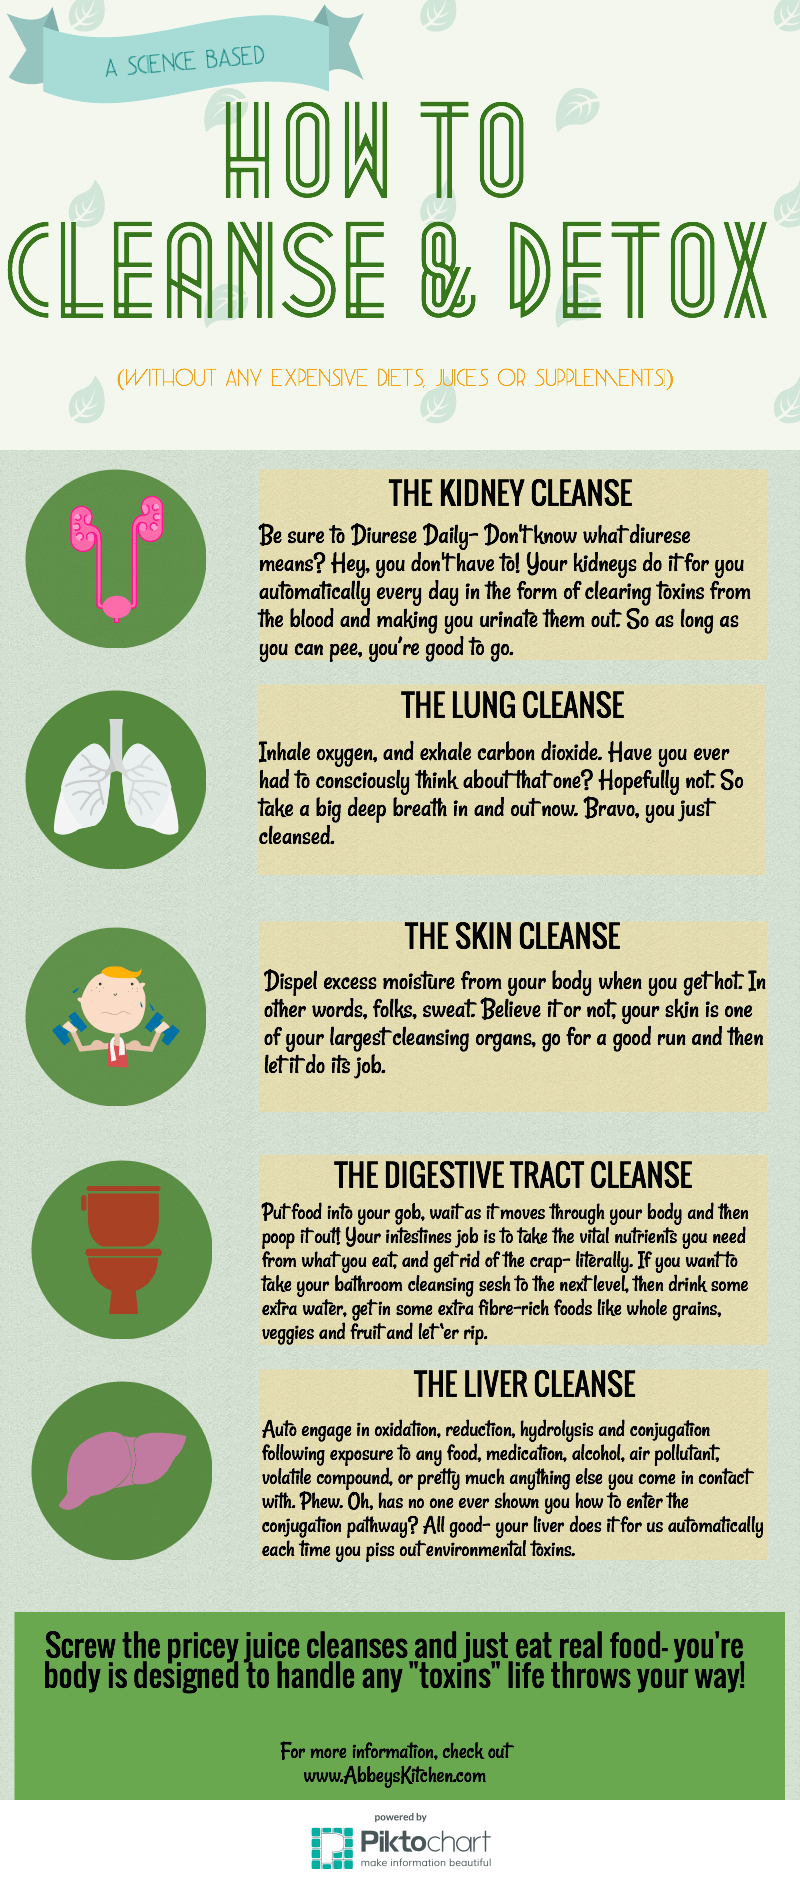 Detox Cleanse infographic